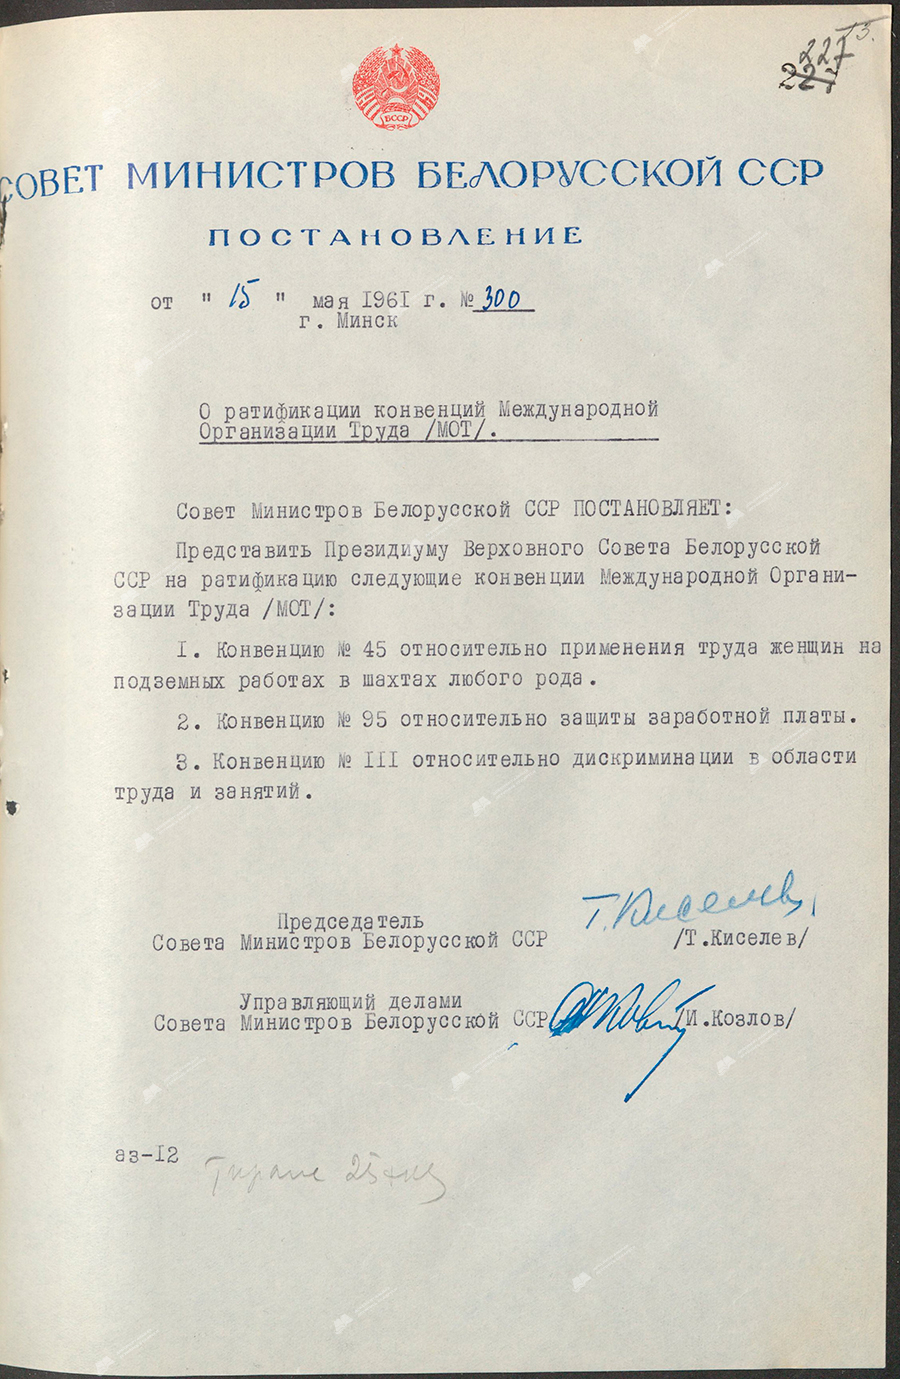 Resolution No. 300 of the Council of Ministers of the BSSR «On the ratification of the conventions of the International Labor Organization (ILO)»-с. 0